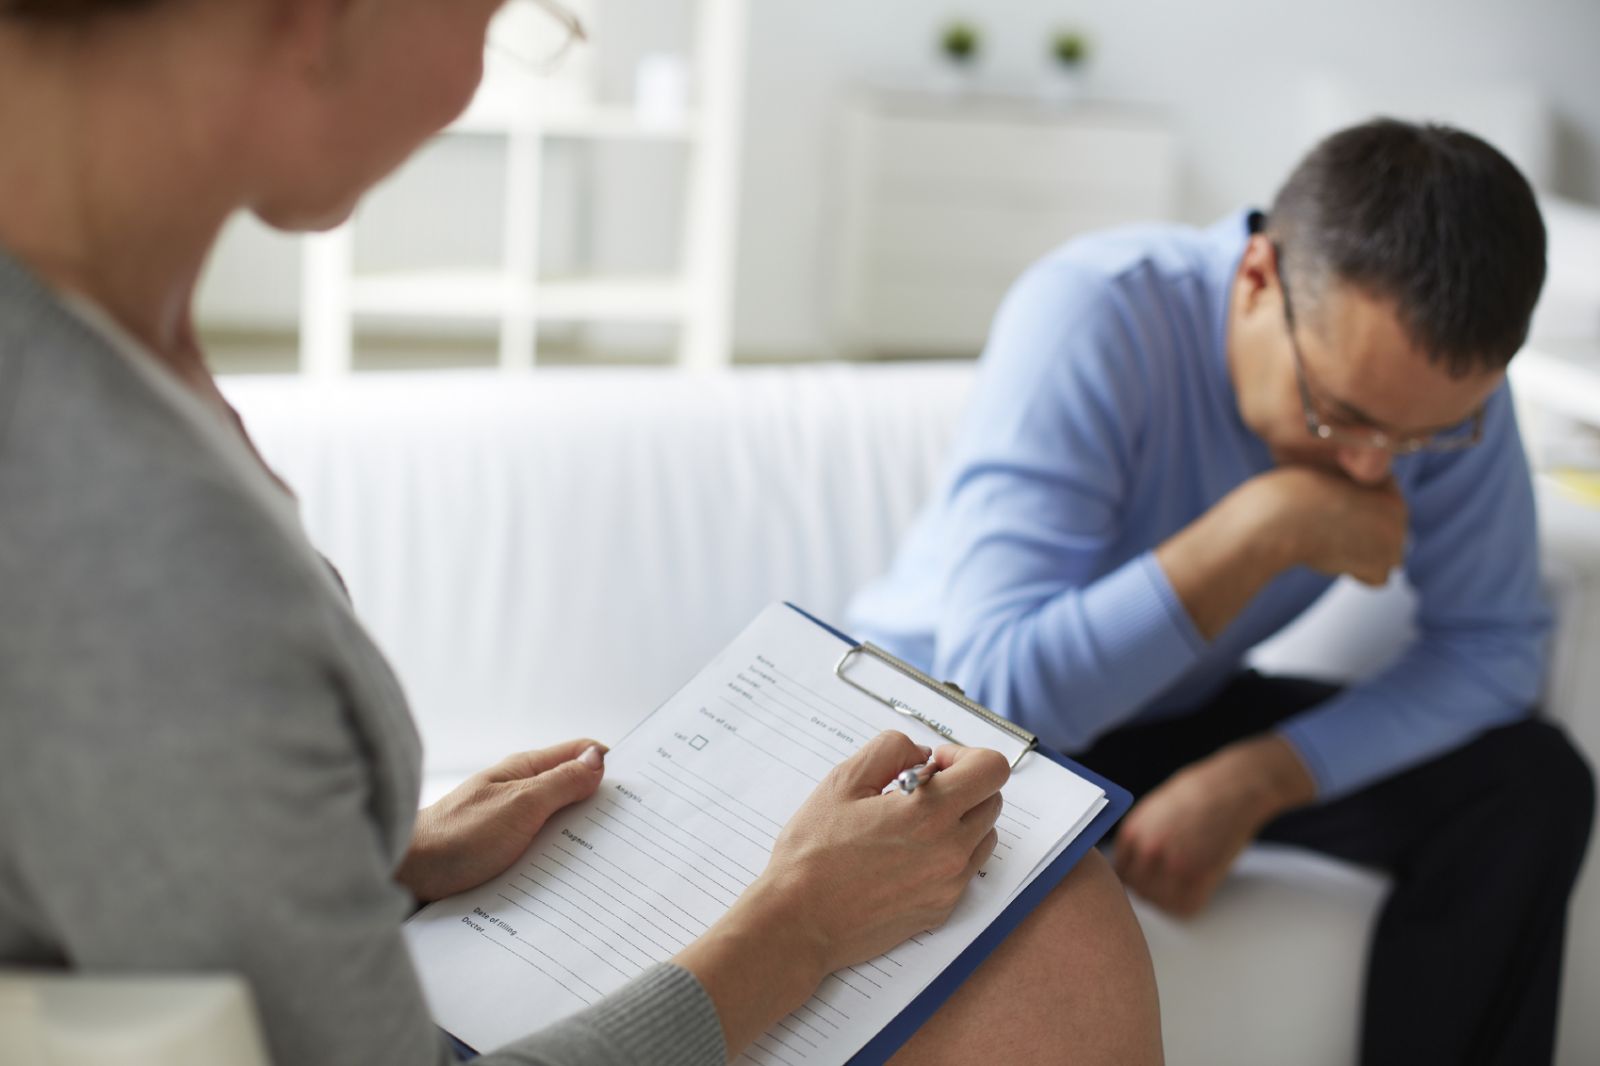 10 questions to ask when choosing a therapist